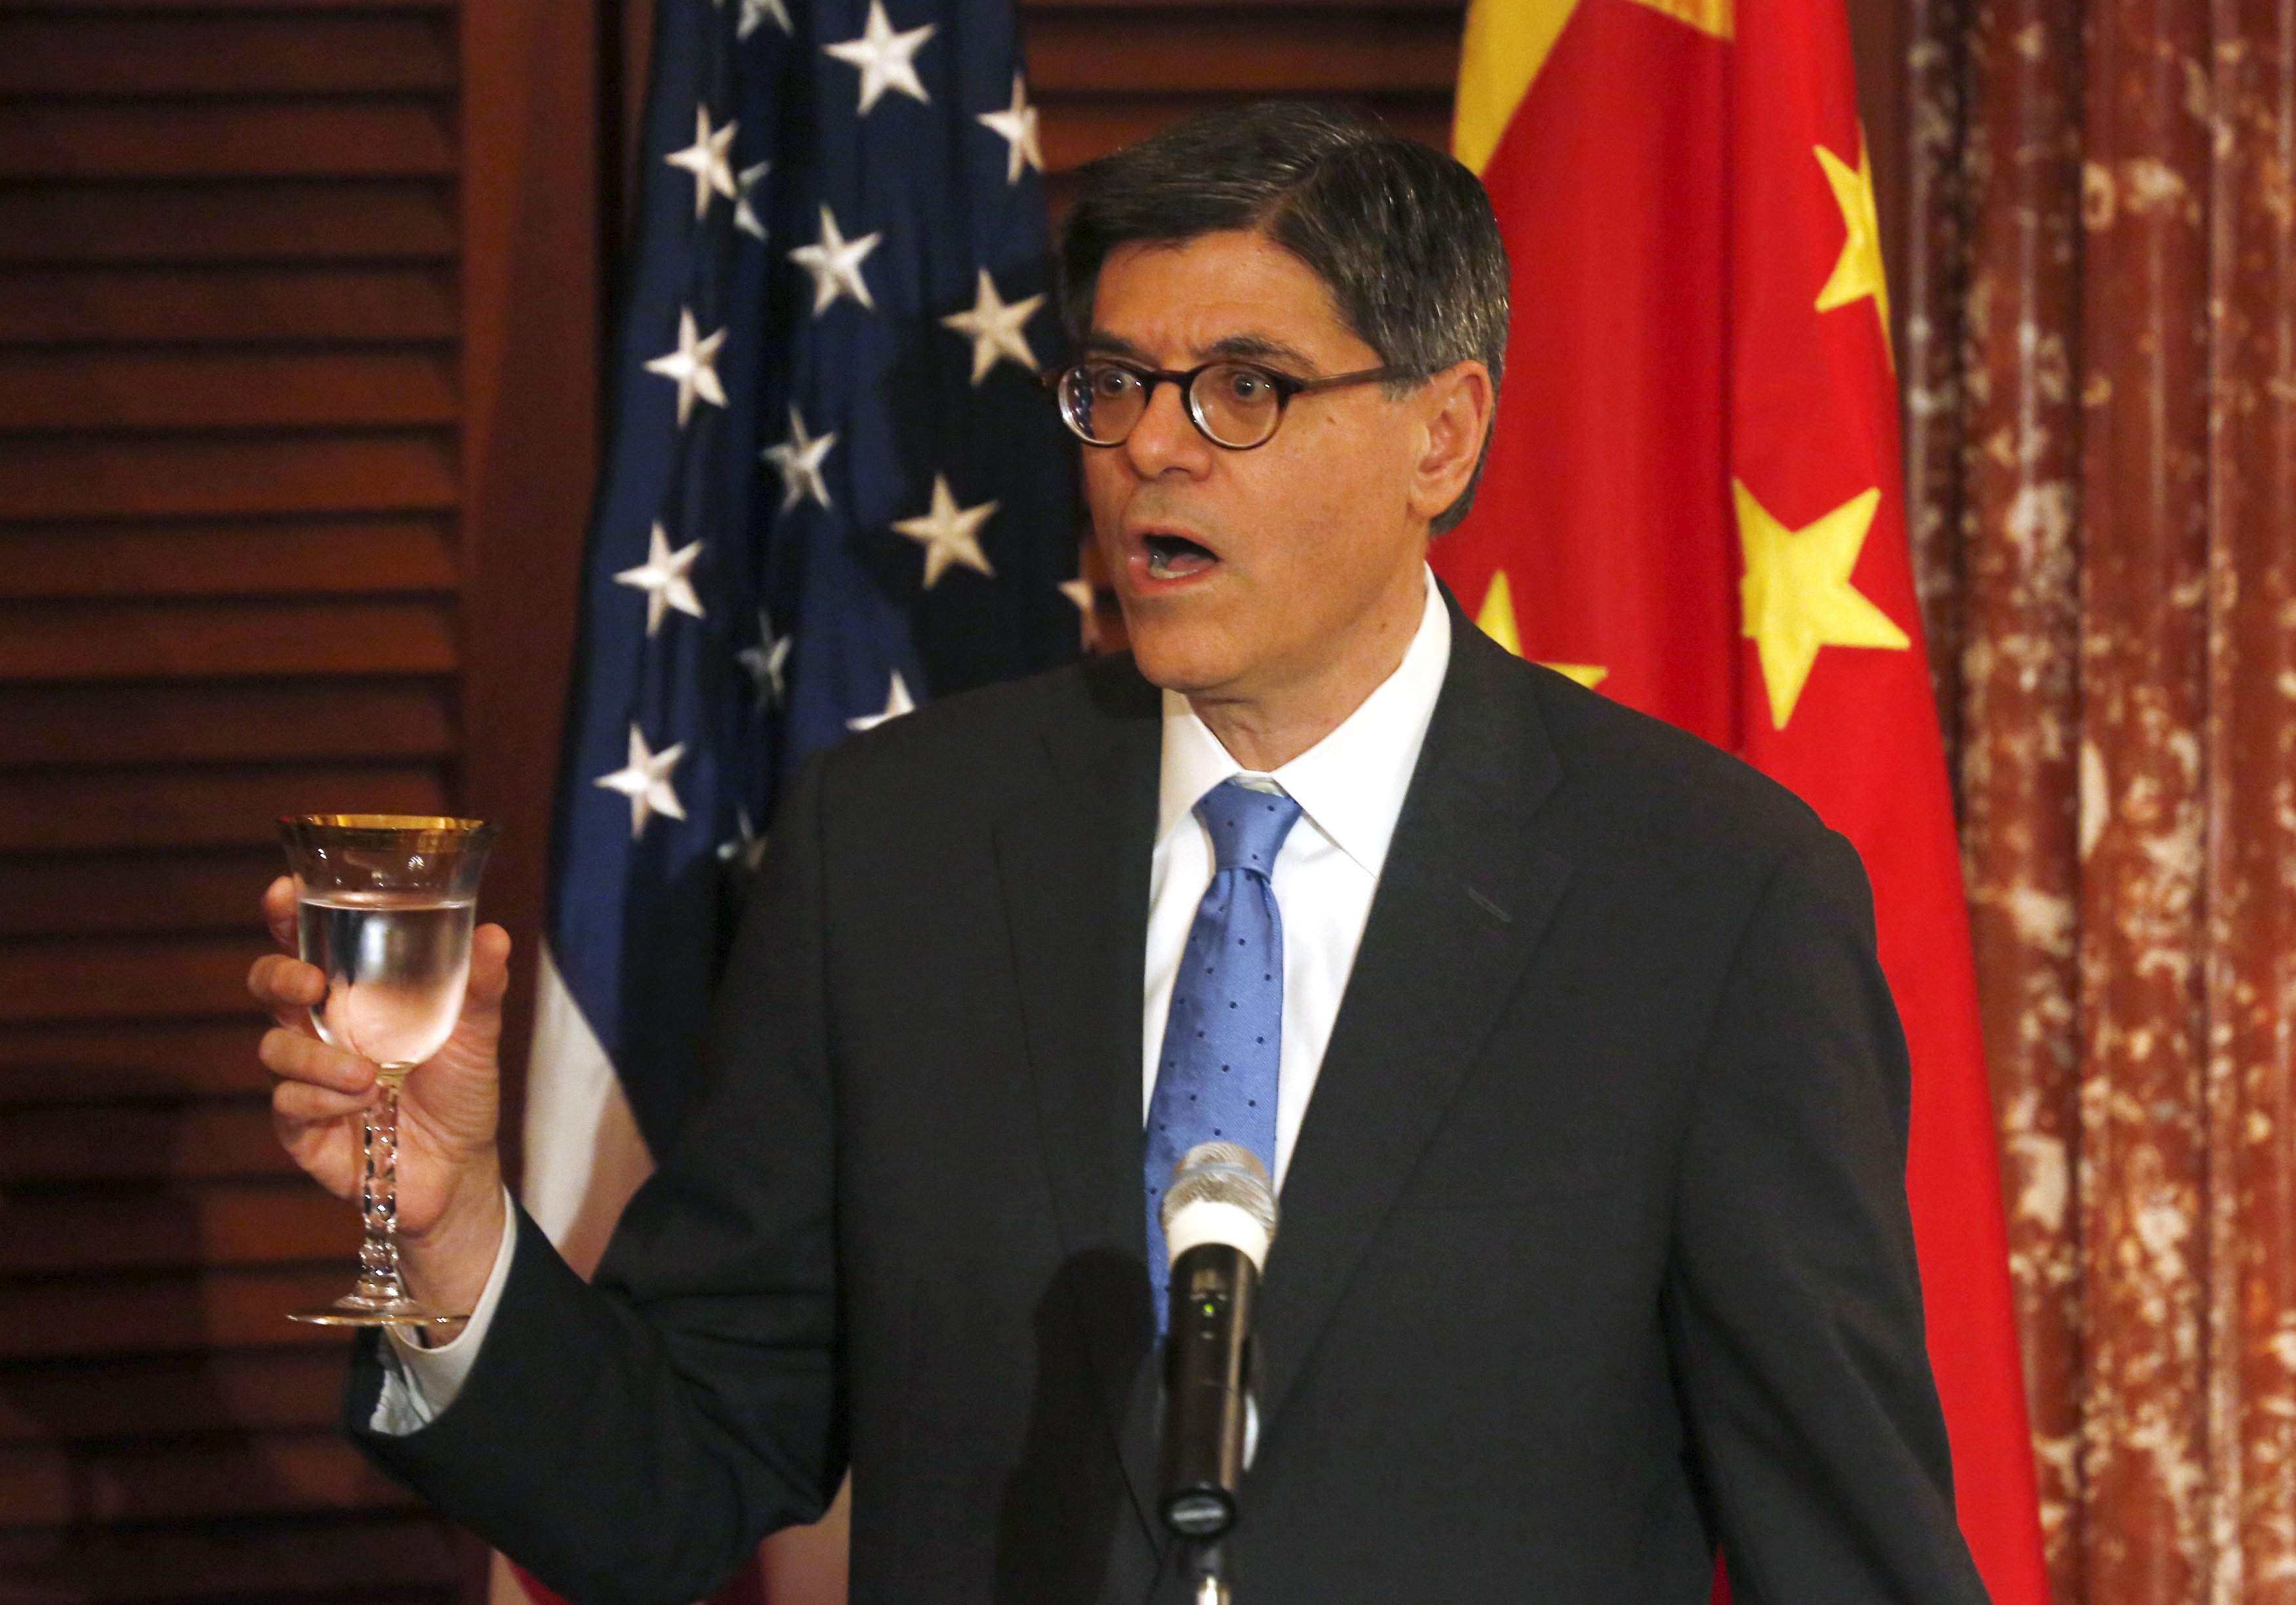 US Treasury Secretary Jack Lew gives a toast during bilateral talks with China as he urged Beijing to move to a market-determined currency policy. Photo: Reuters